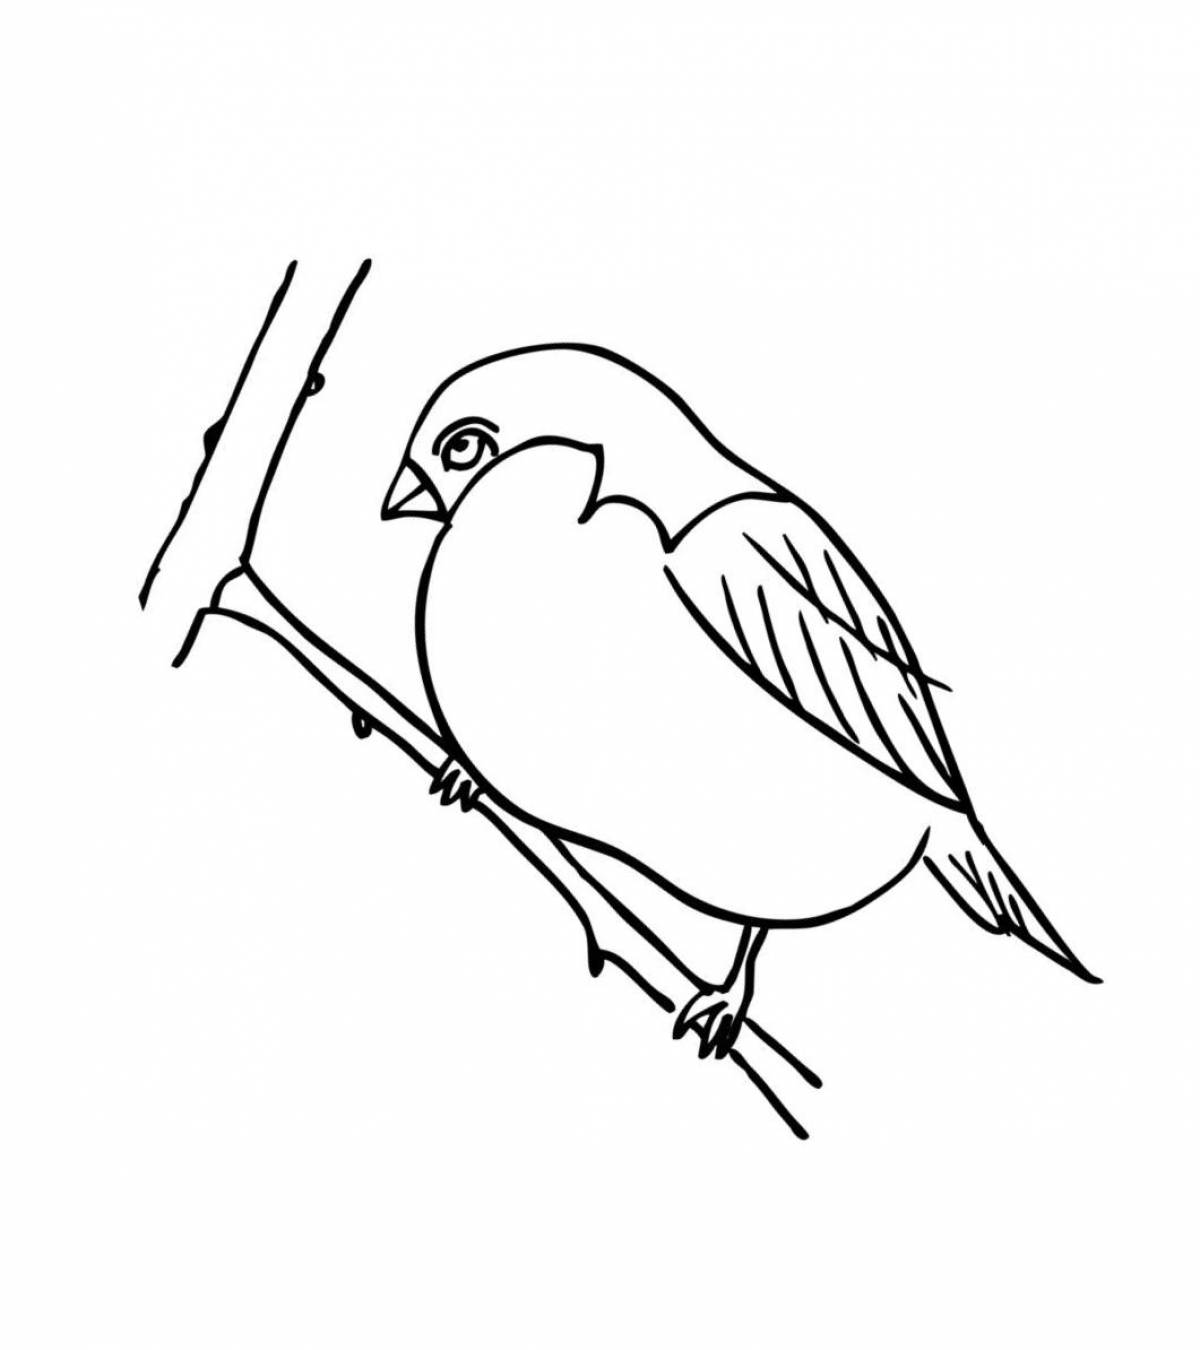 Bullfinch on a branch printable coloring page